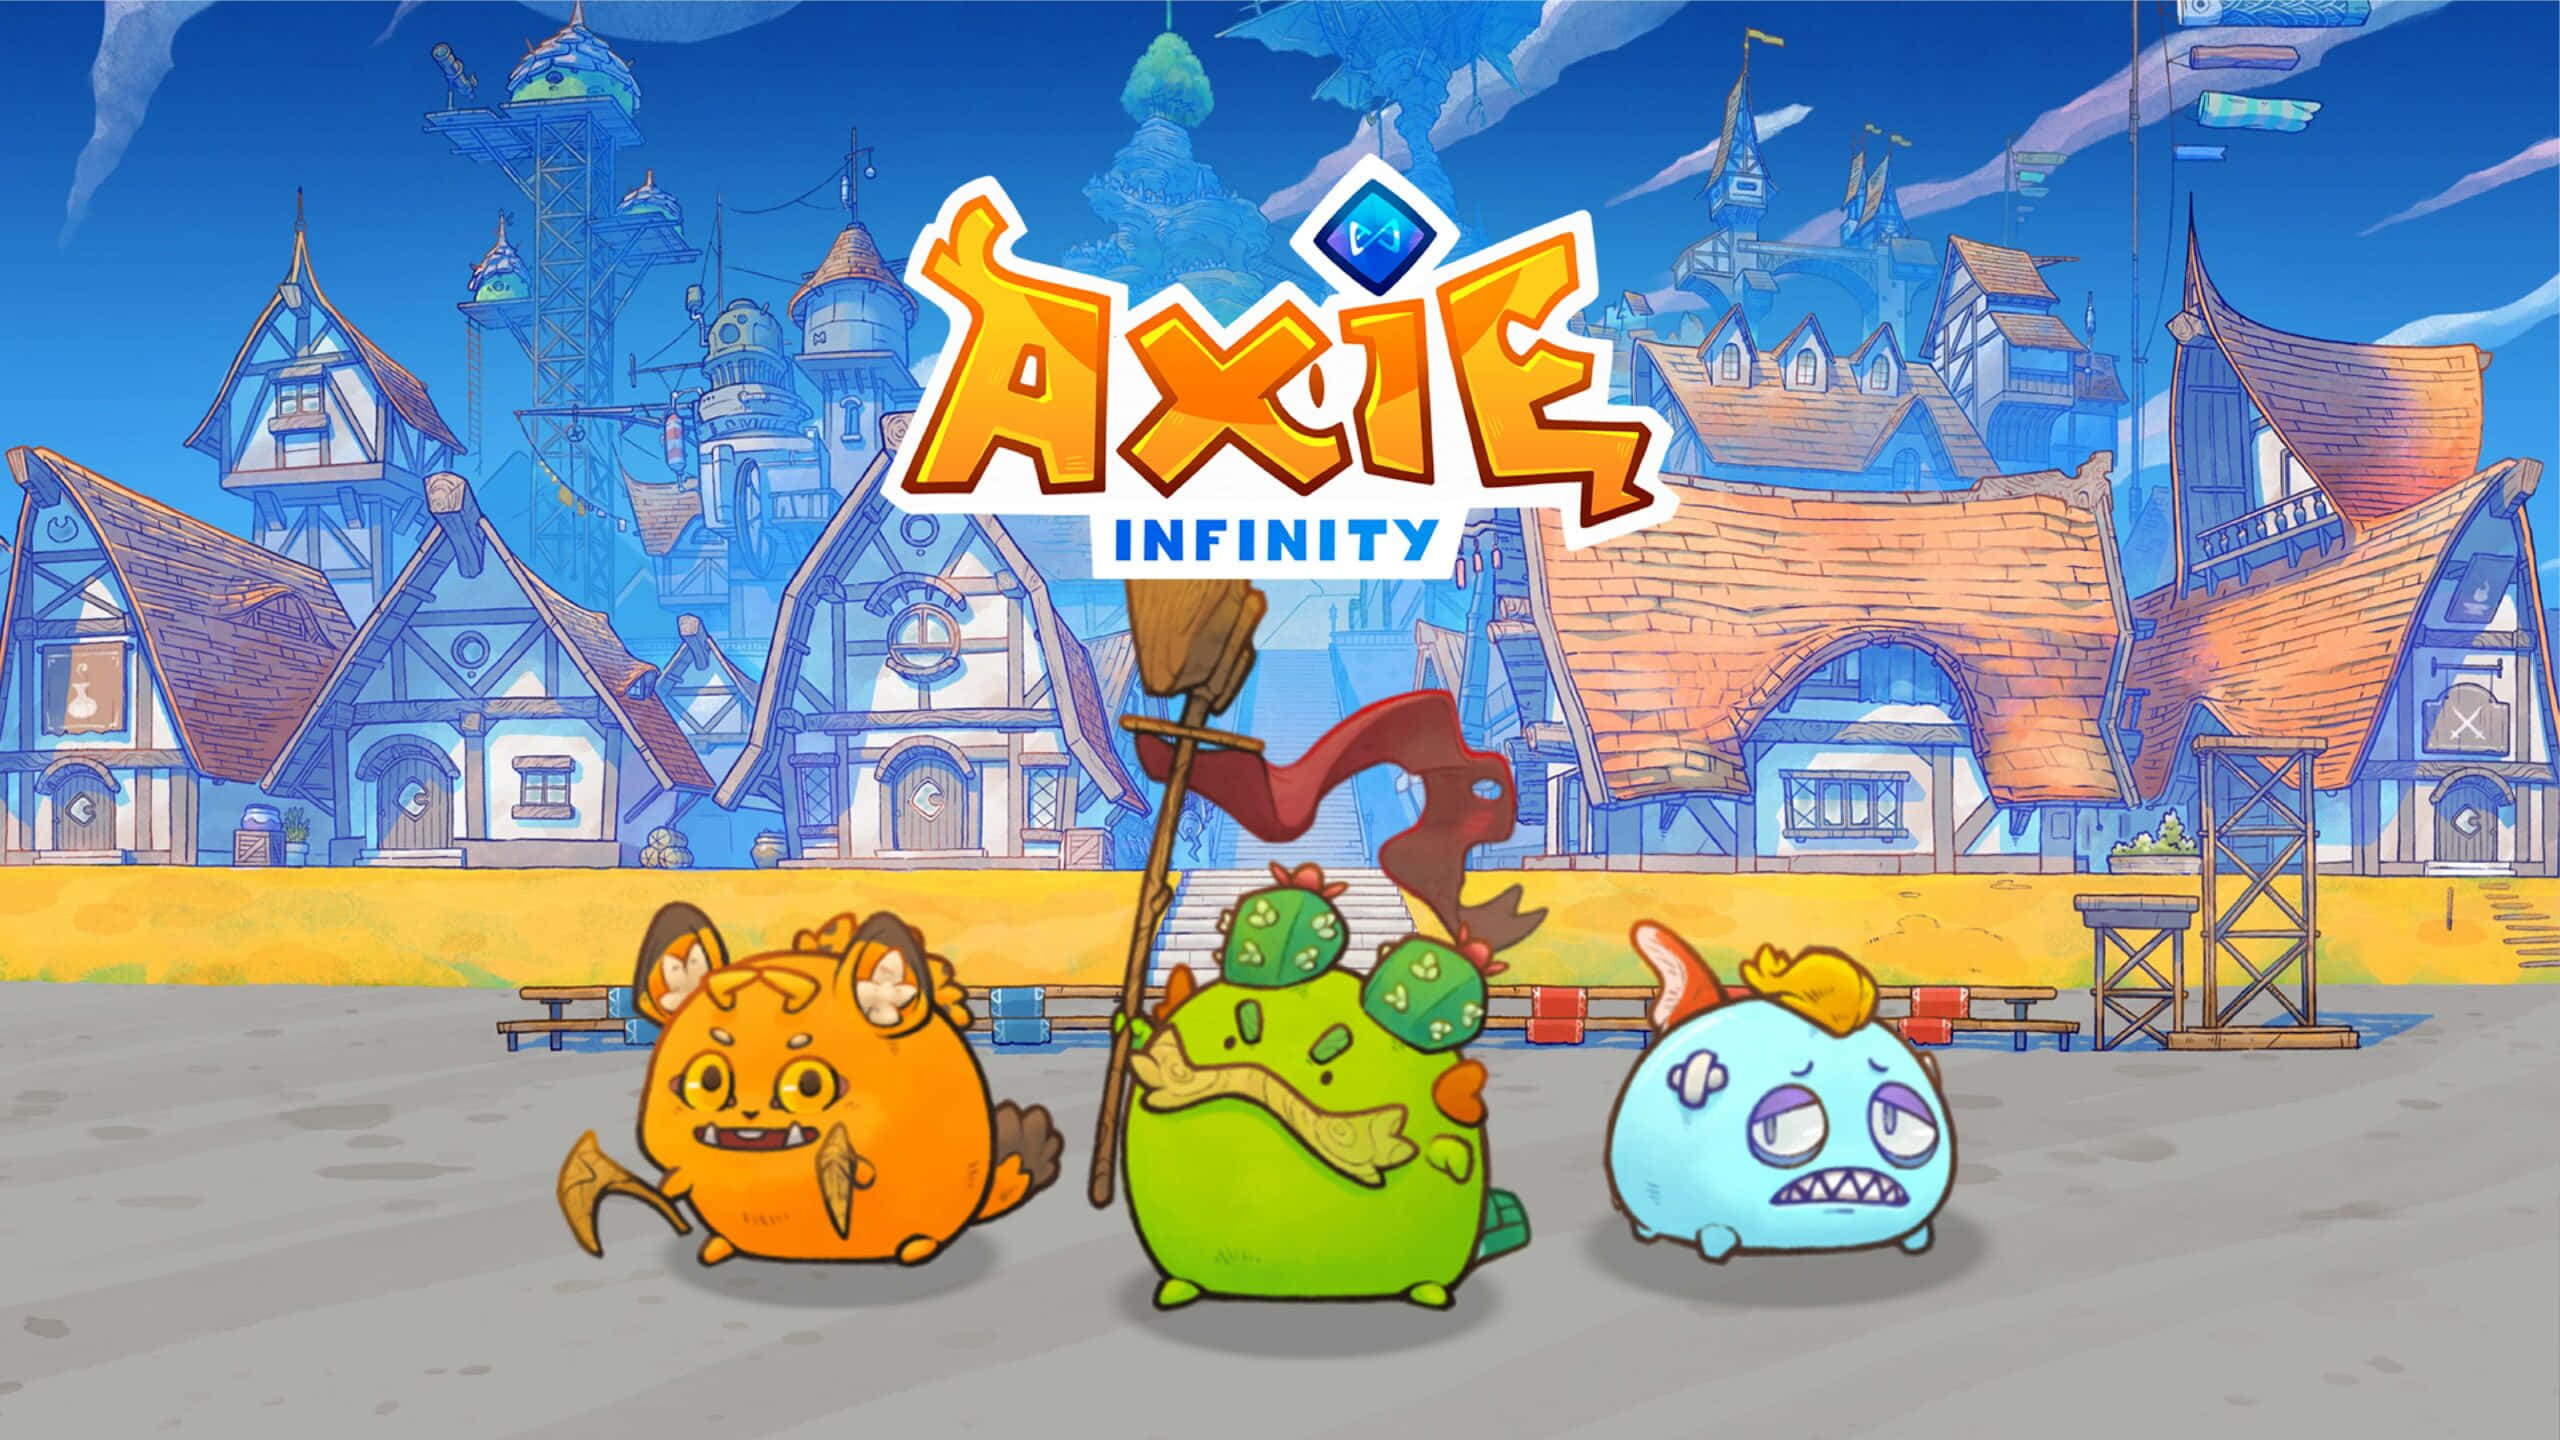 Welcome to the world of Axie Infinity